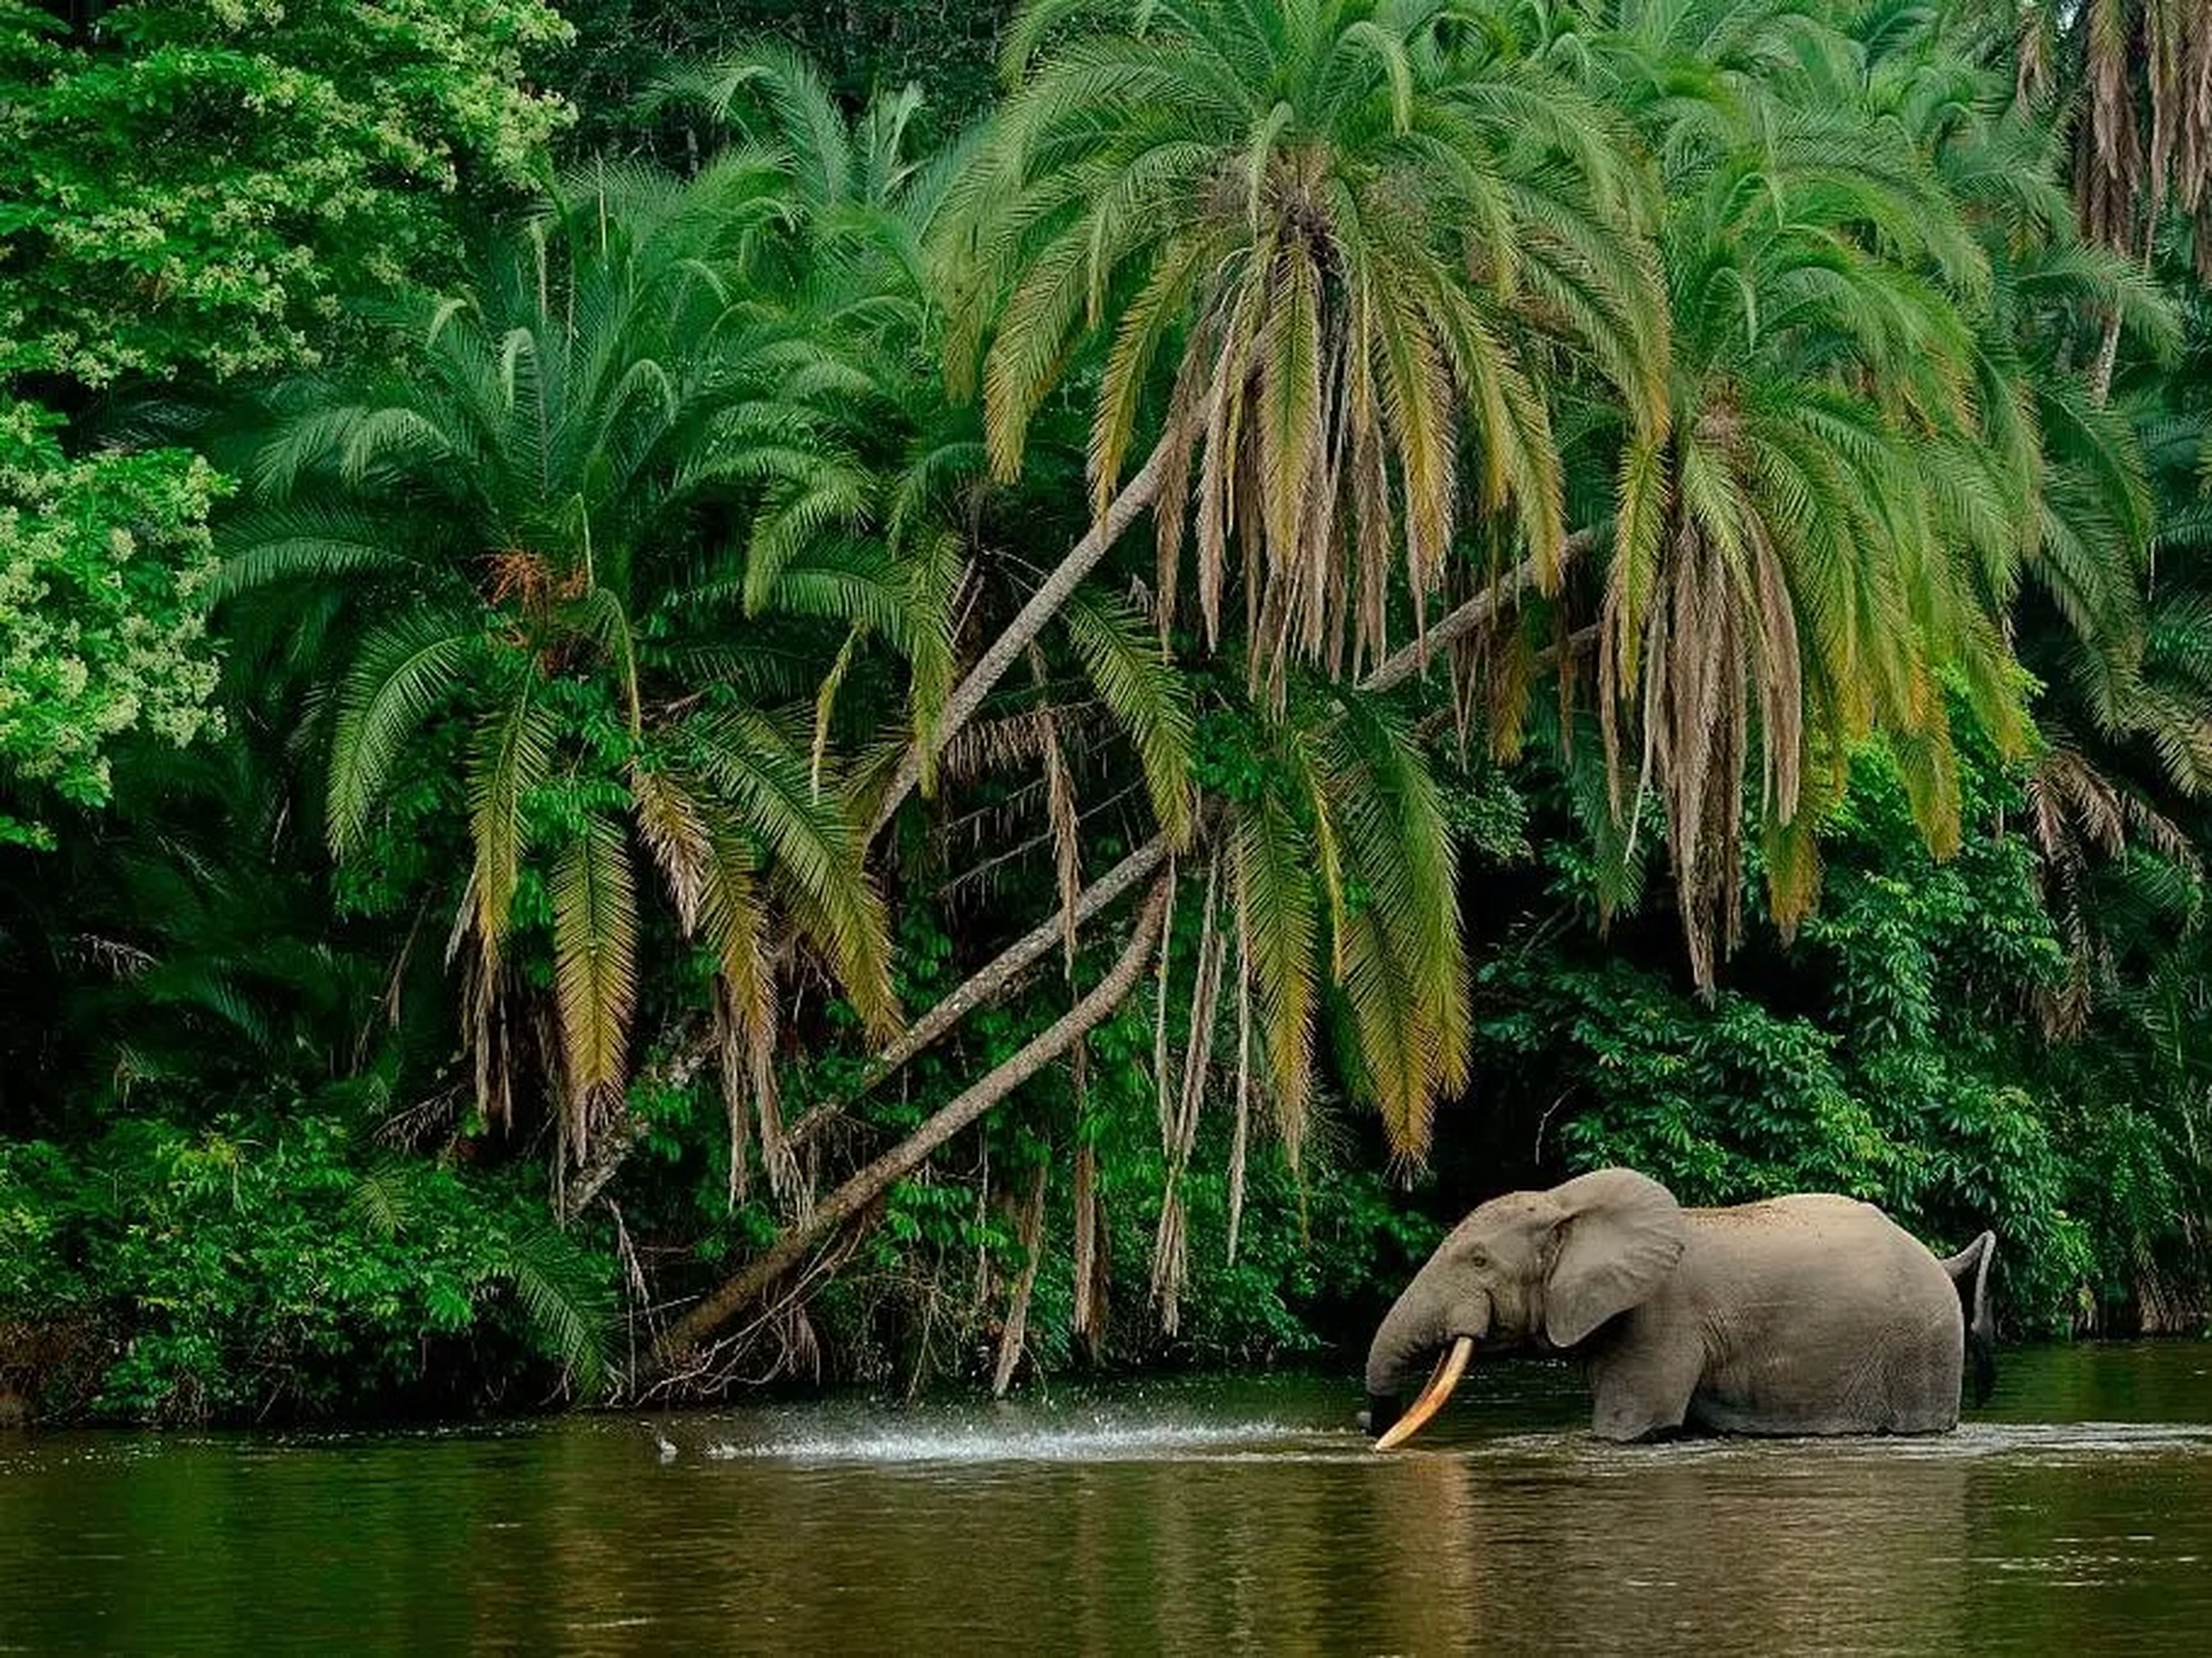 The endangered African forest elephant in Odzala-Kokoua National Park, Republic of the Congo.